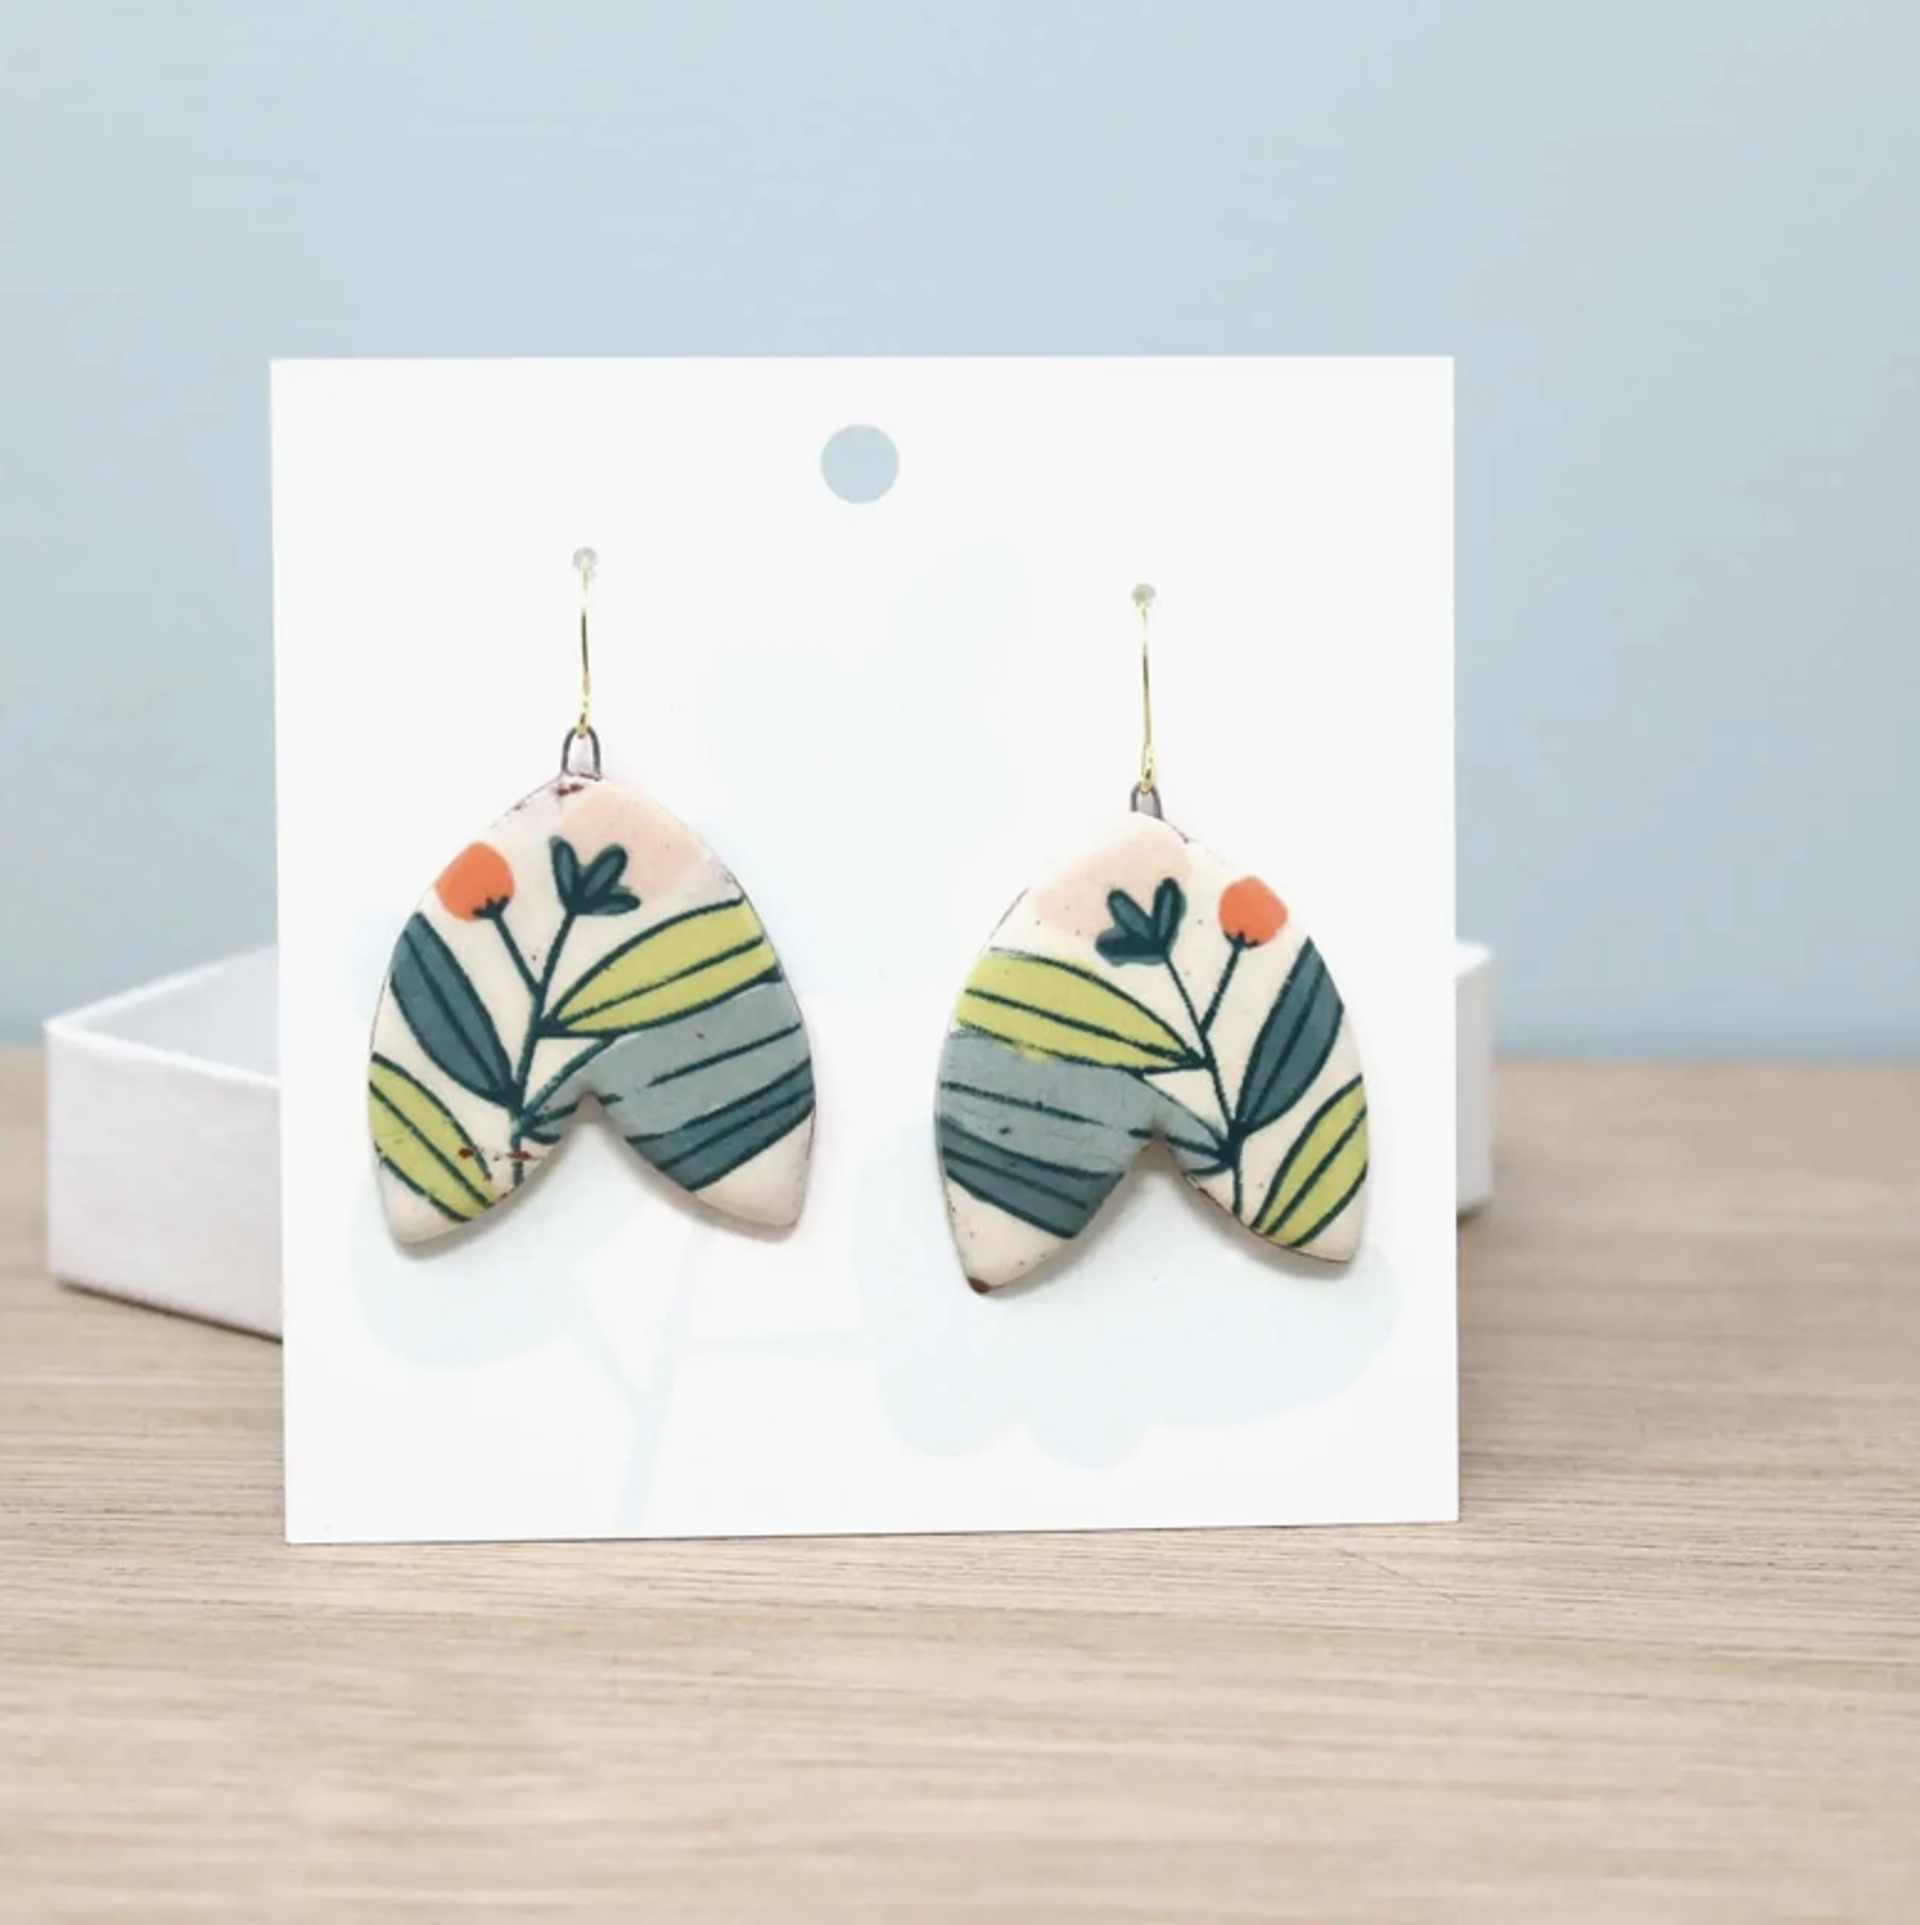 Leaf Earrings with 14k Gold-Plated Hooks by Catie Miller Ceramics